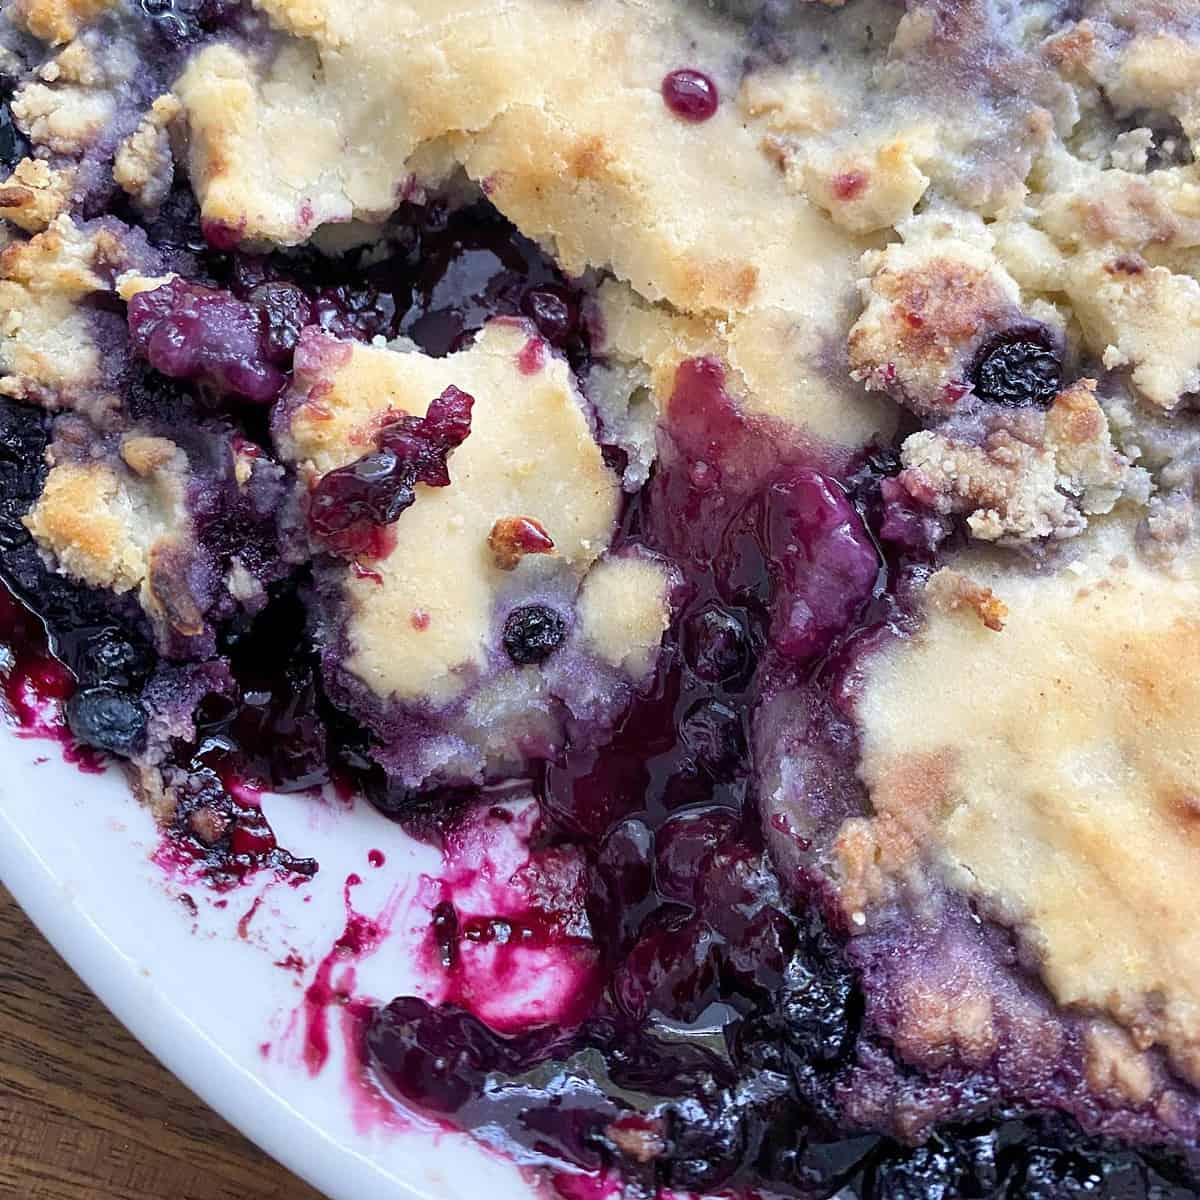  Sweet and juicy blueberries hidden under a layer of delicious crust.